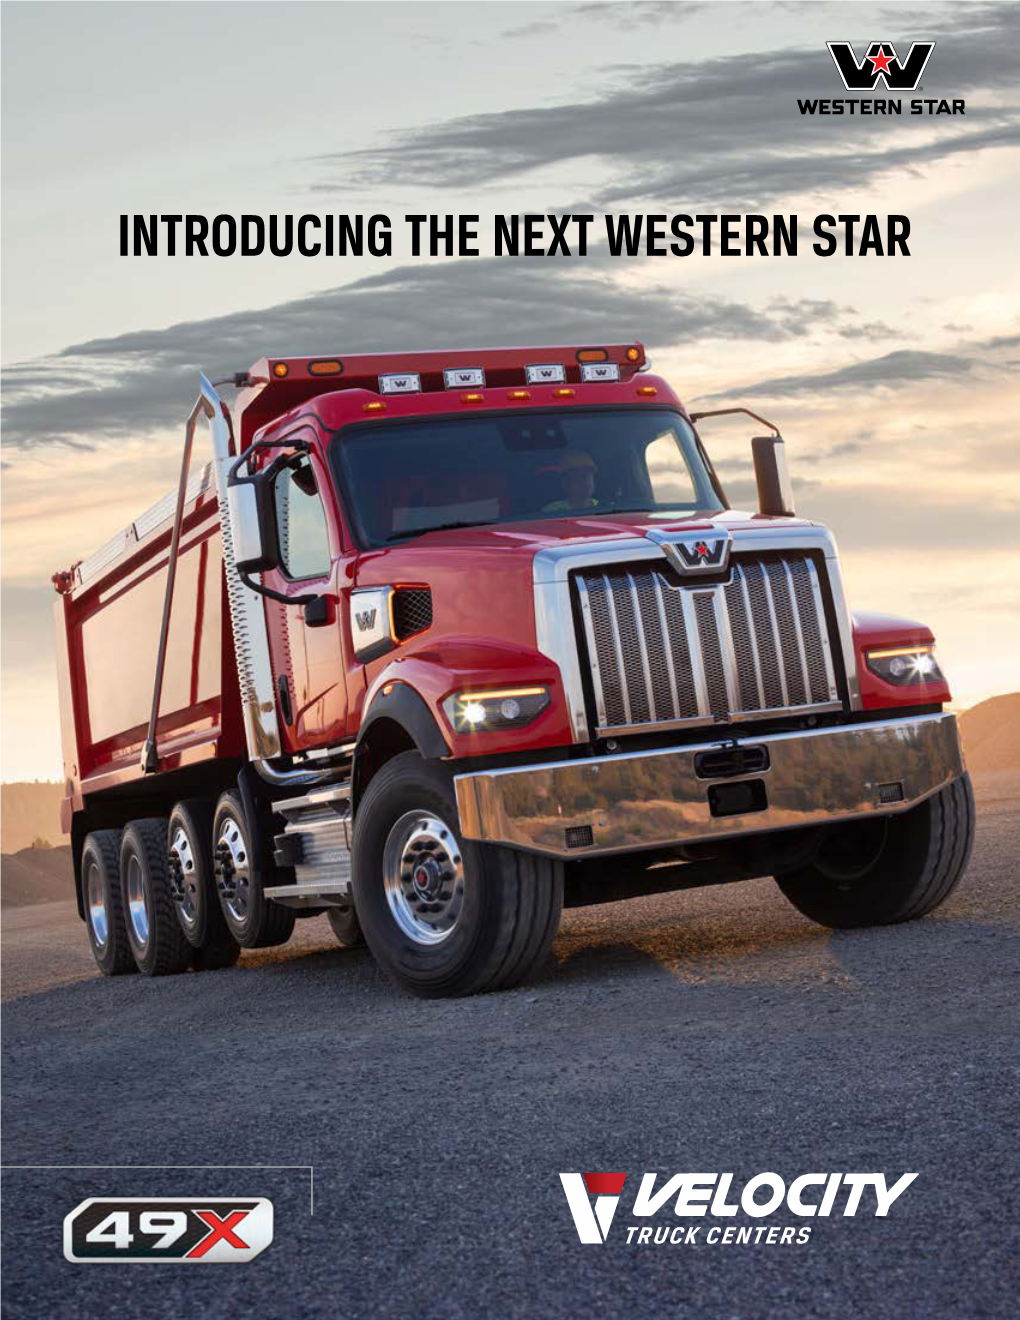 Introducing the Next Western Star Simply the Best Truck We’Ve Ever Built